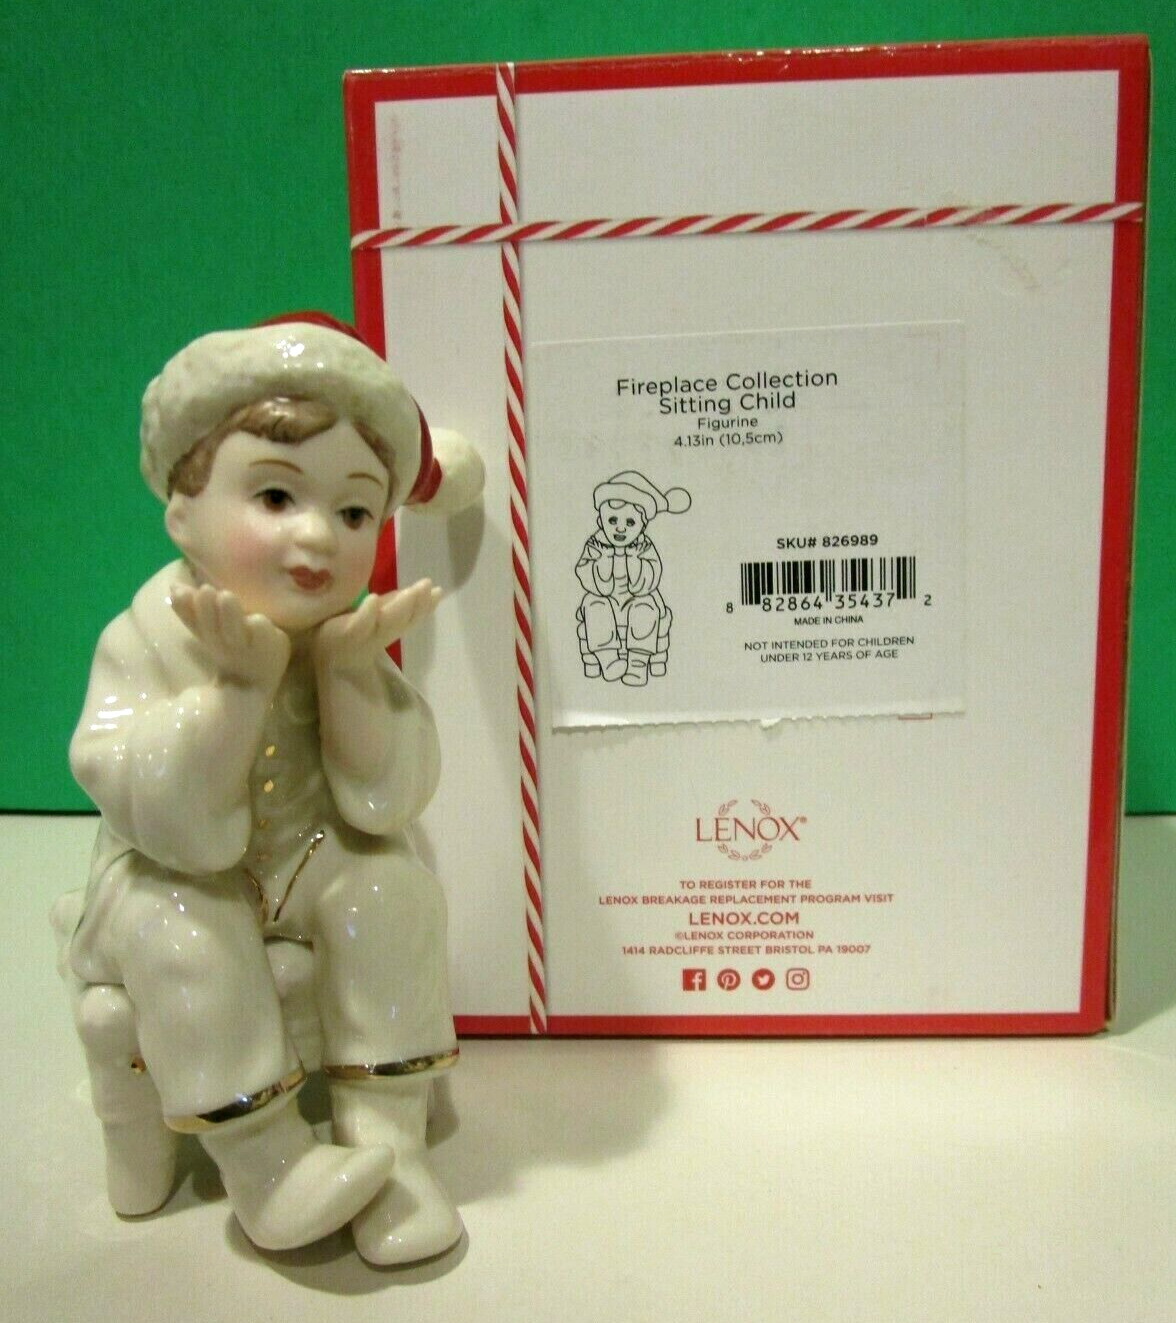 LENOX FIREPLACE COLLECTION  - SITTING CHILD - sculpture  -- -- NEW in BOX